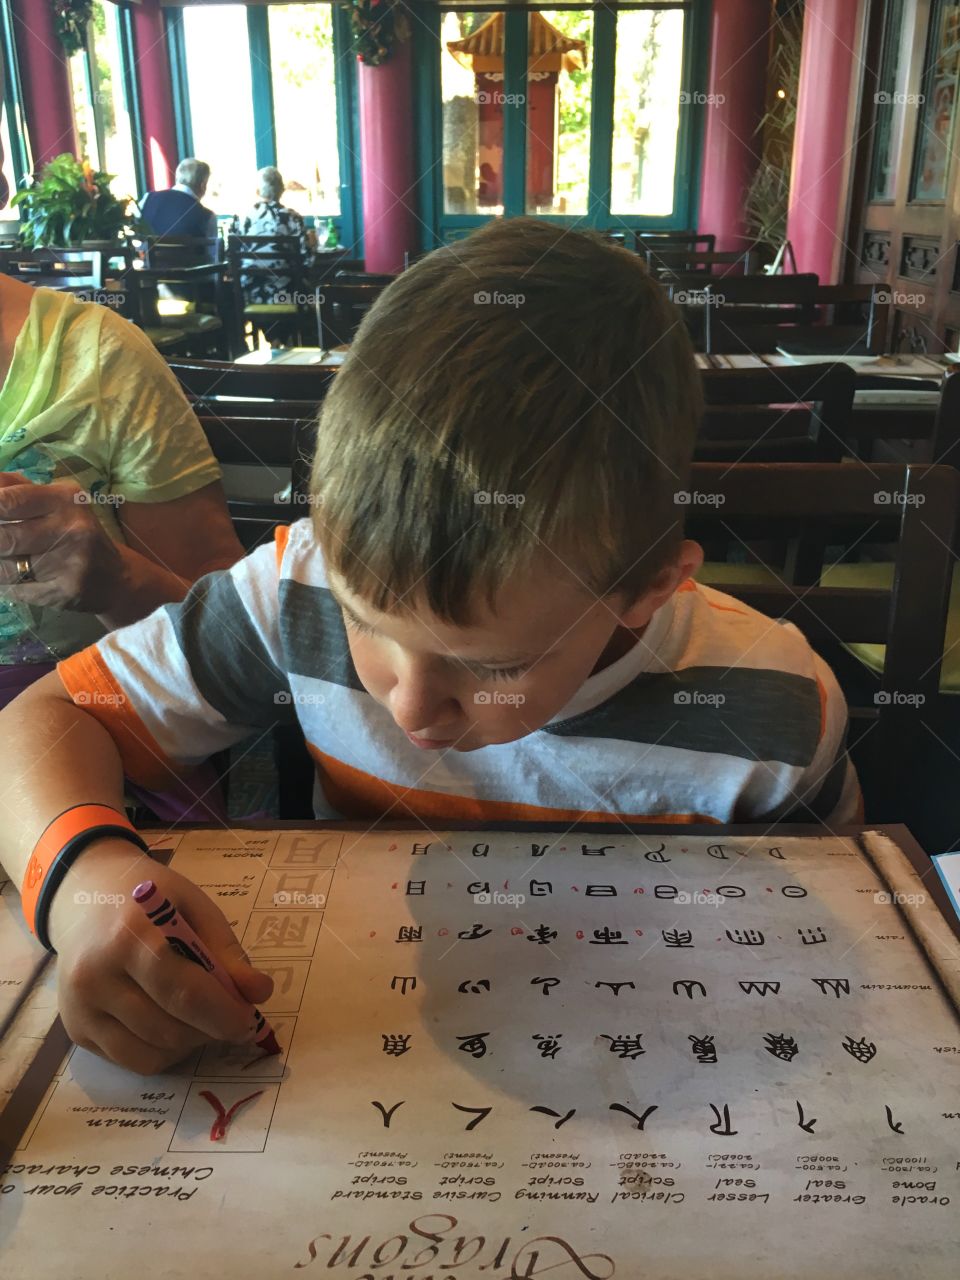 While waiting for the food, the boy is learning chinese writing. He is very concentrated on the task. He's learning.